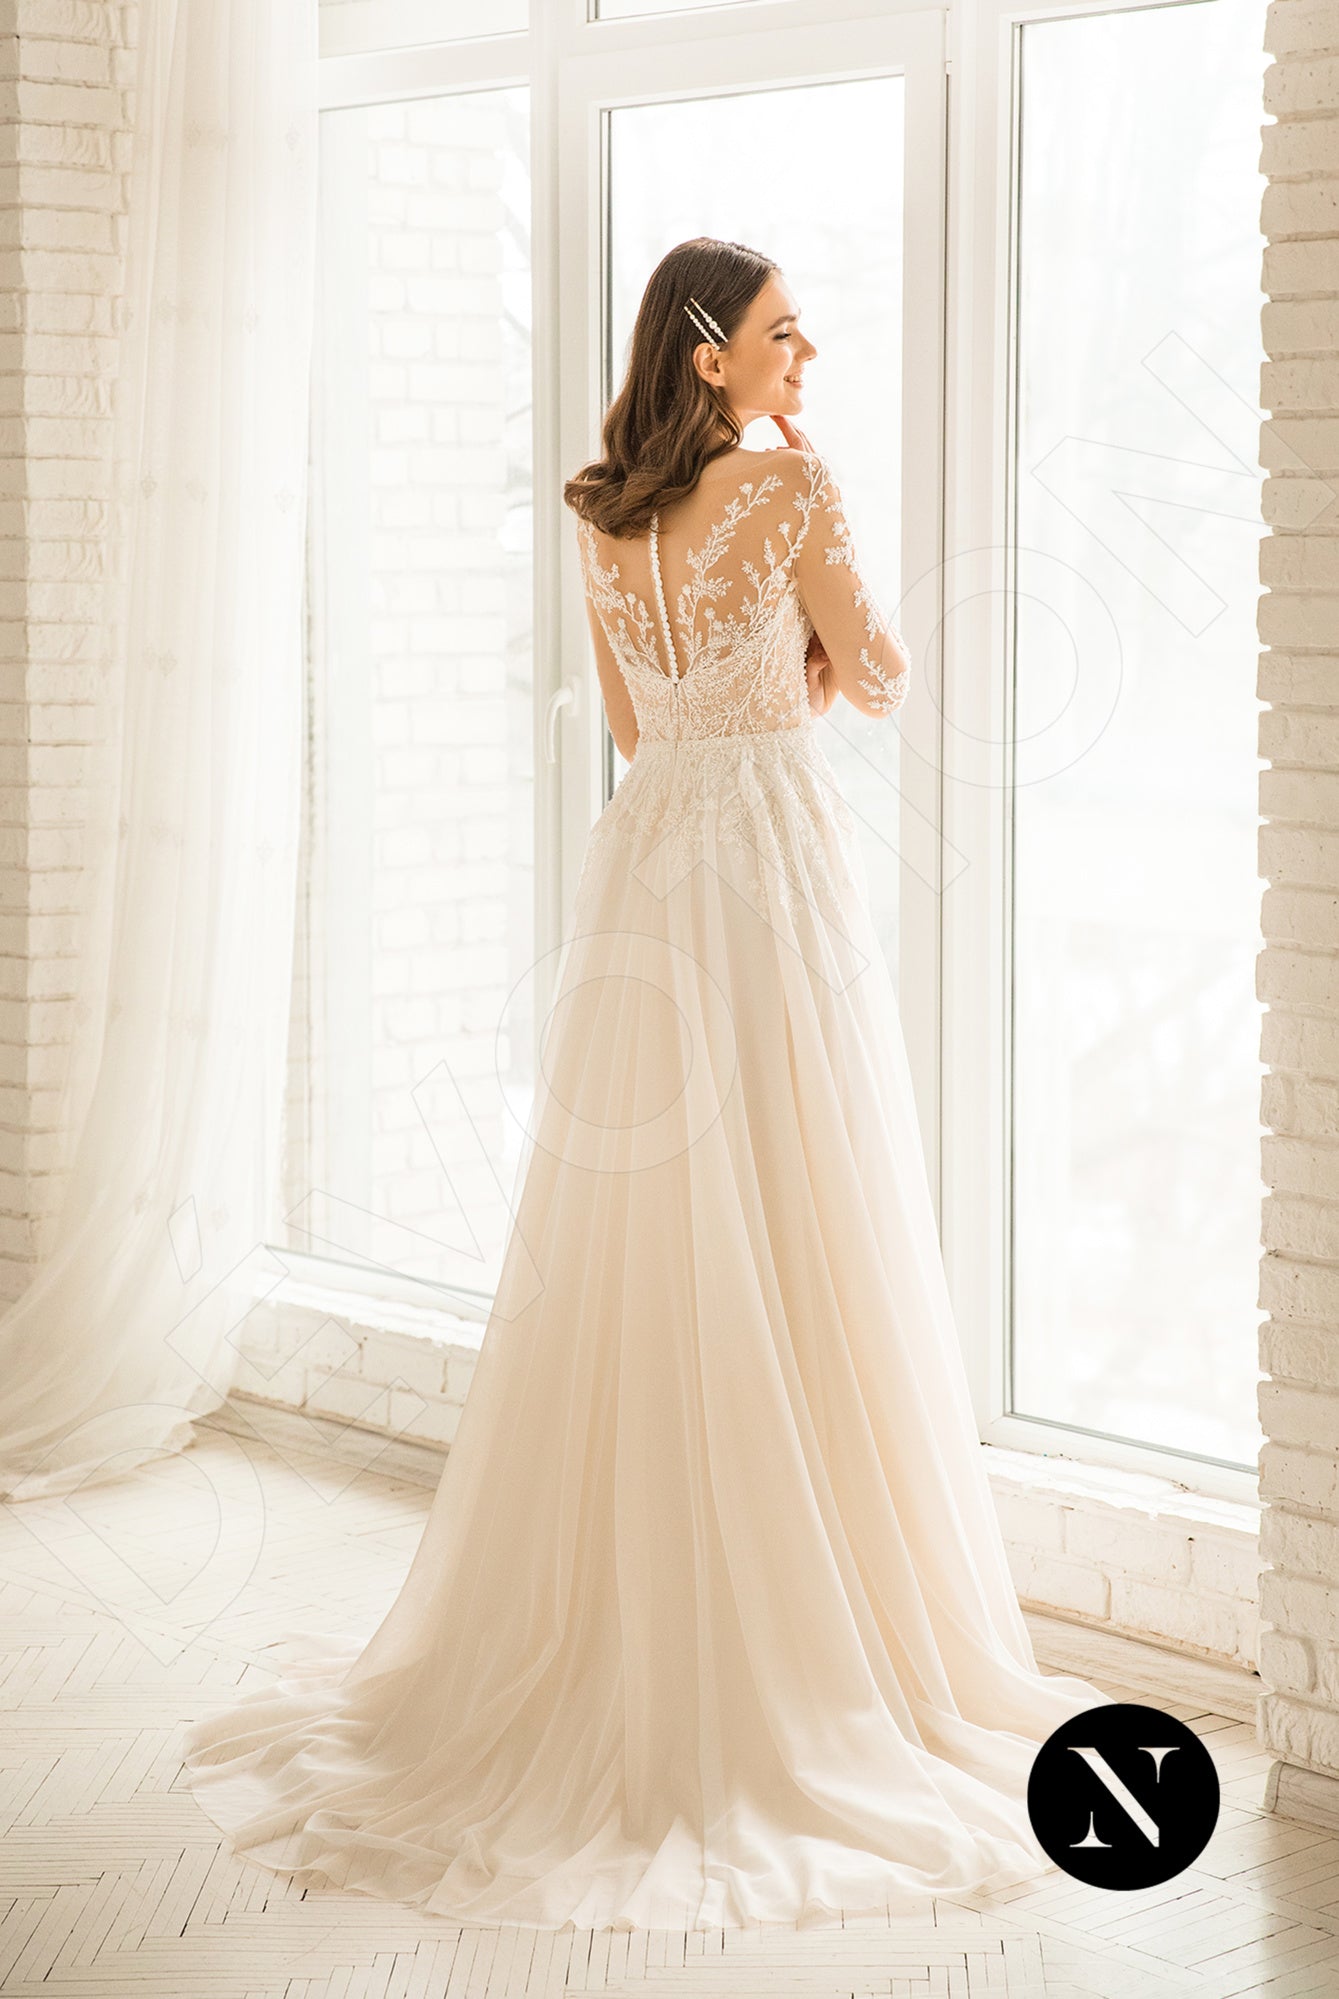 Classic ivory a-line wedding dress with lace applique and sheer illusion  straps